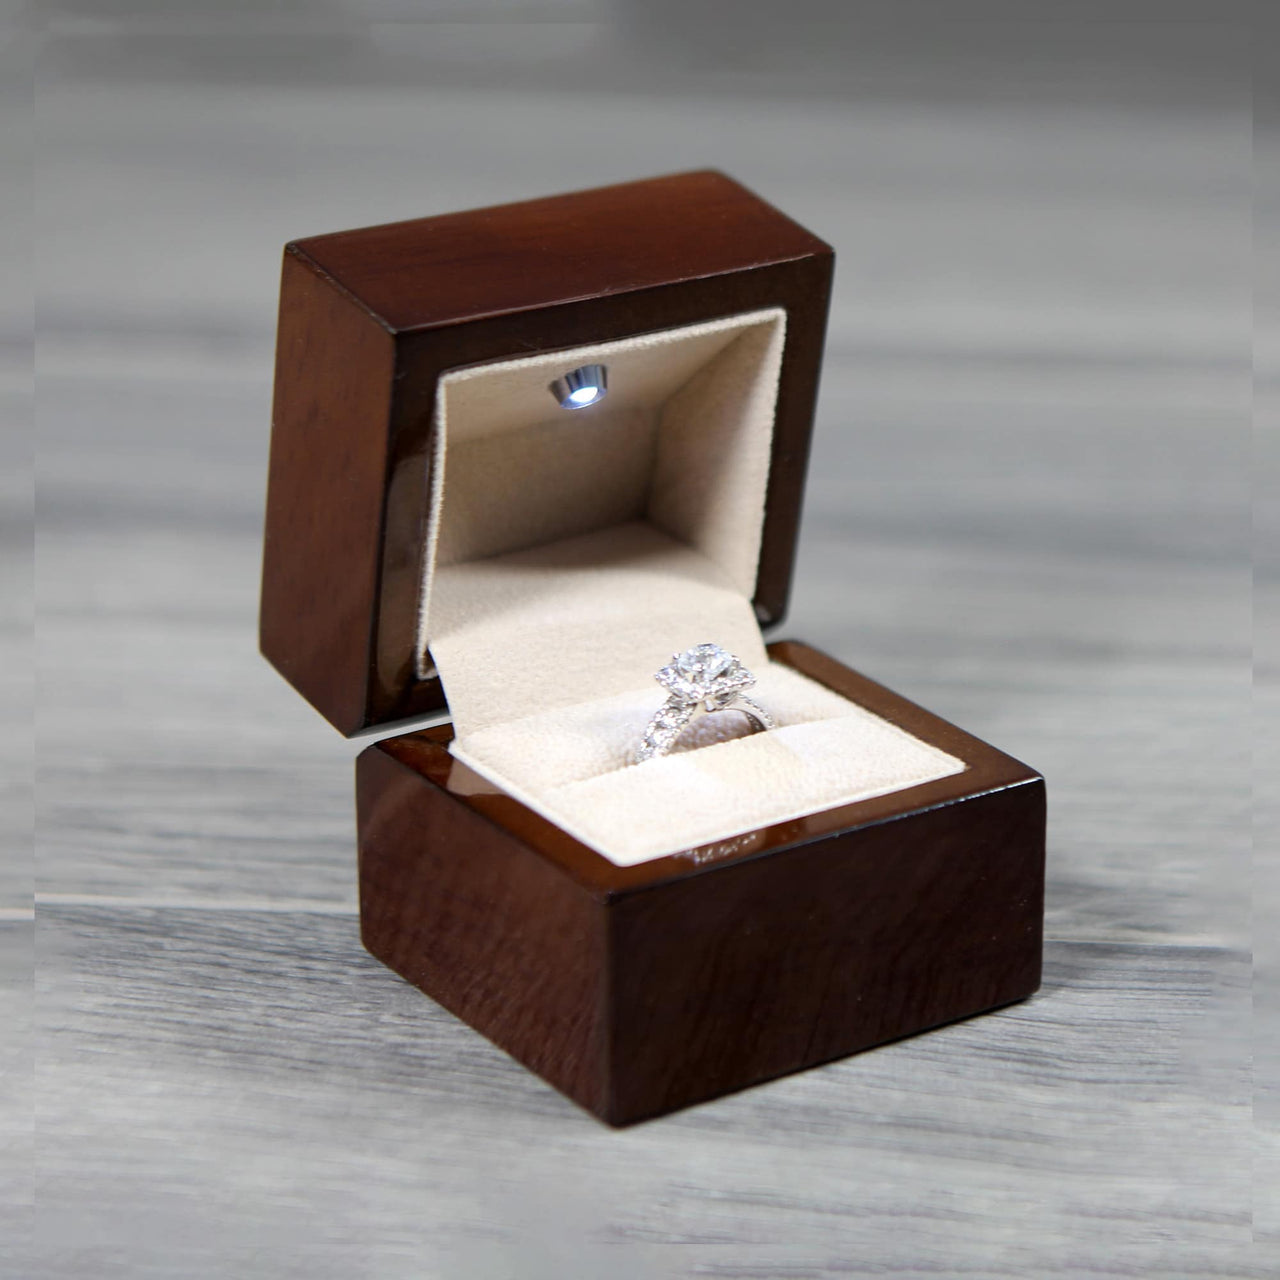 wooden proposal ring box with light to enhance sparkles of your proposal ring